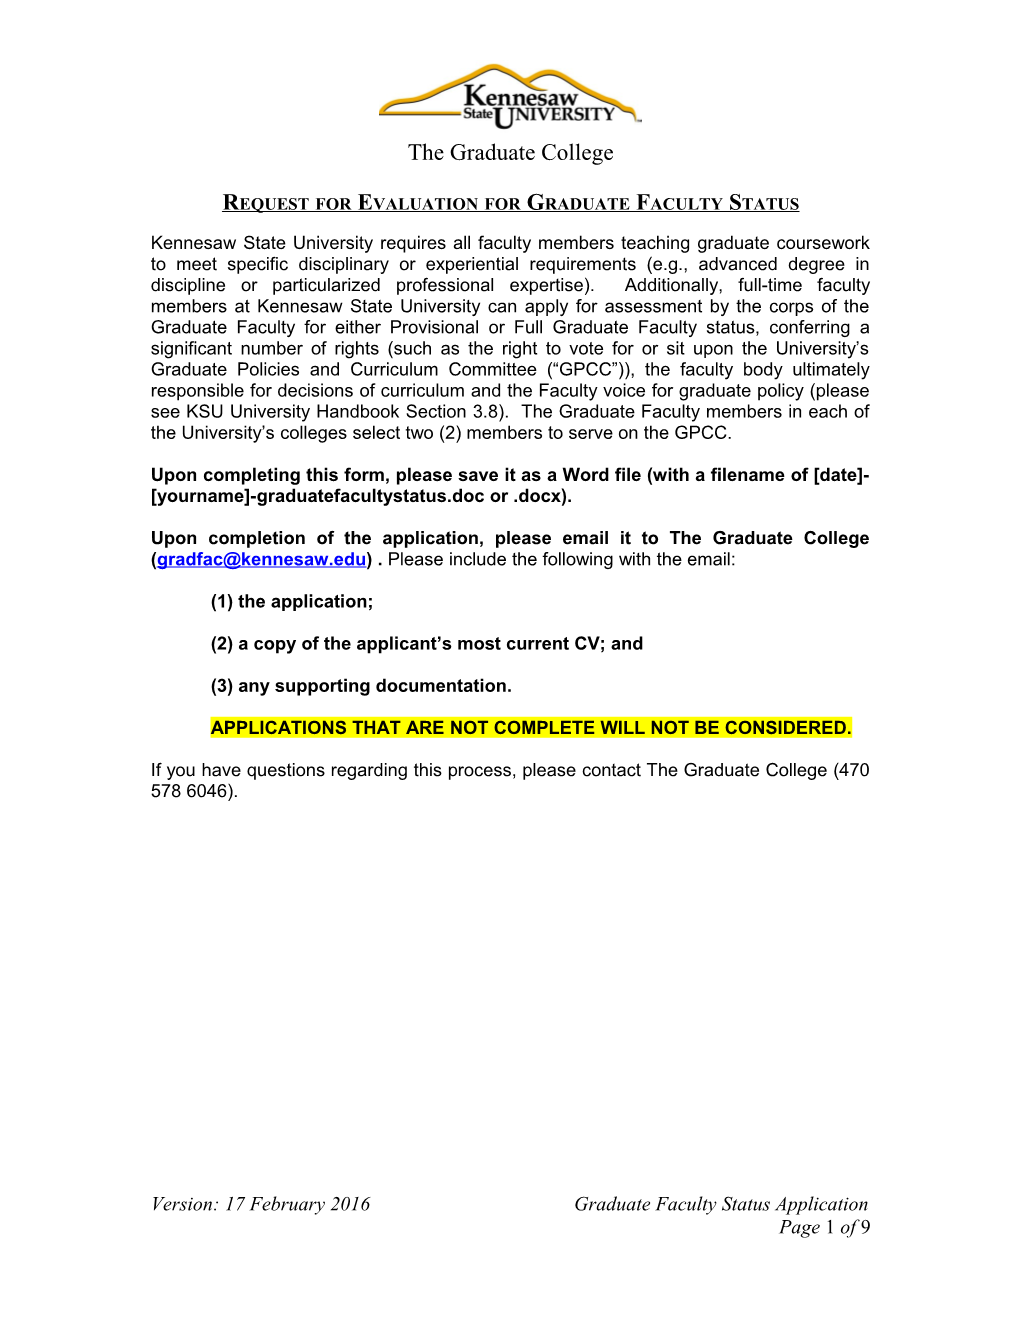 Request for Evaluation for Graduate Faculty Status